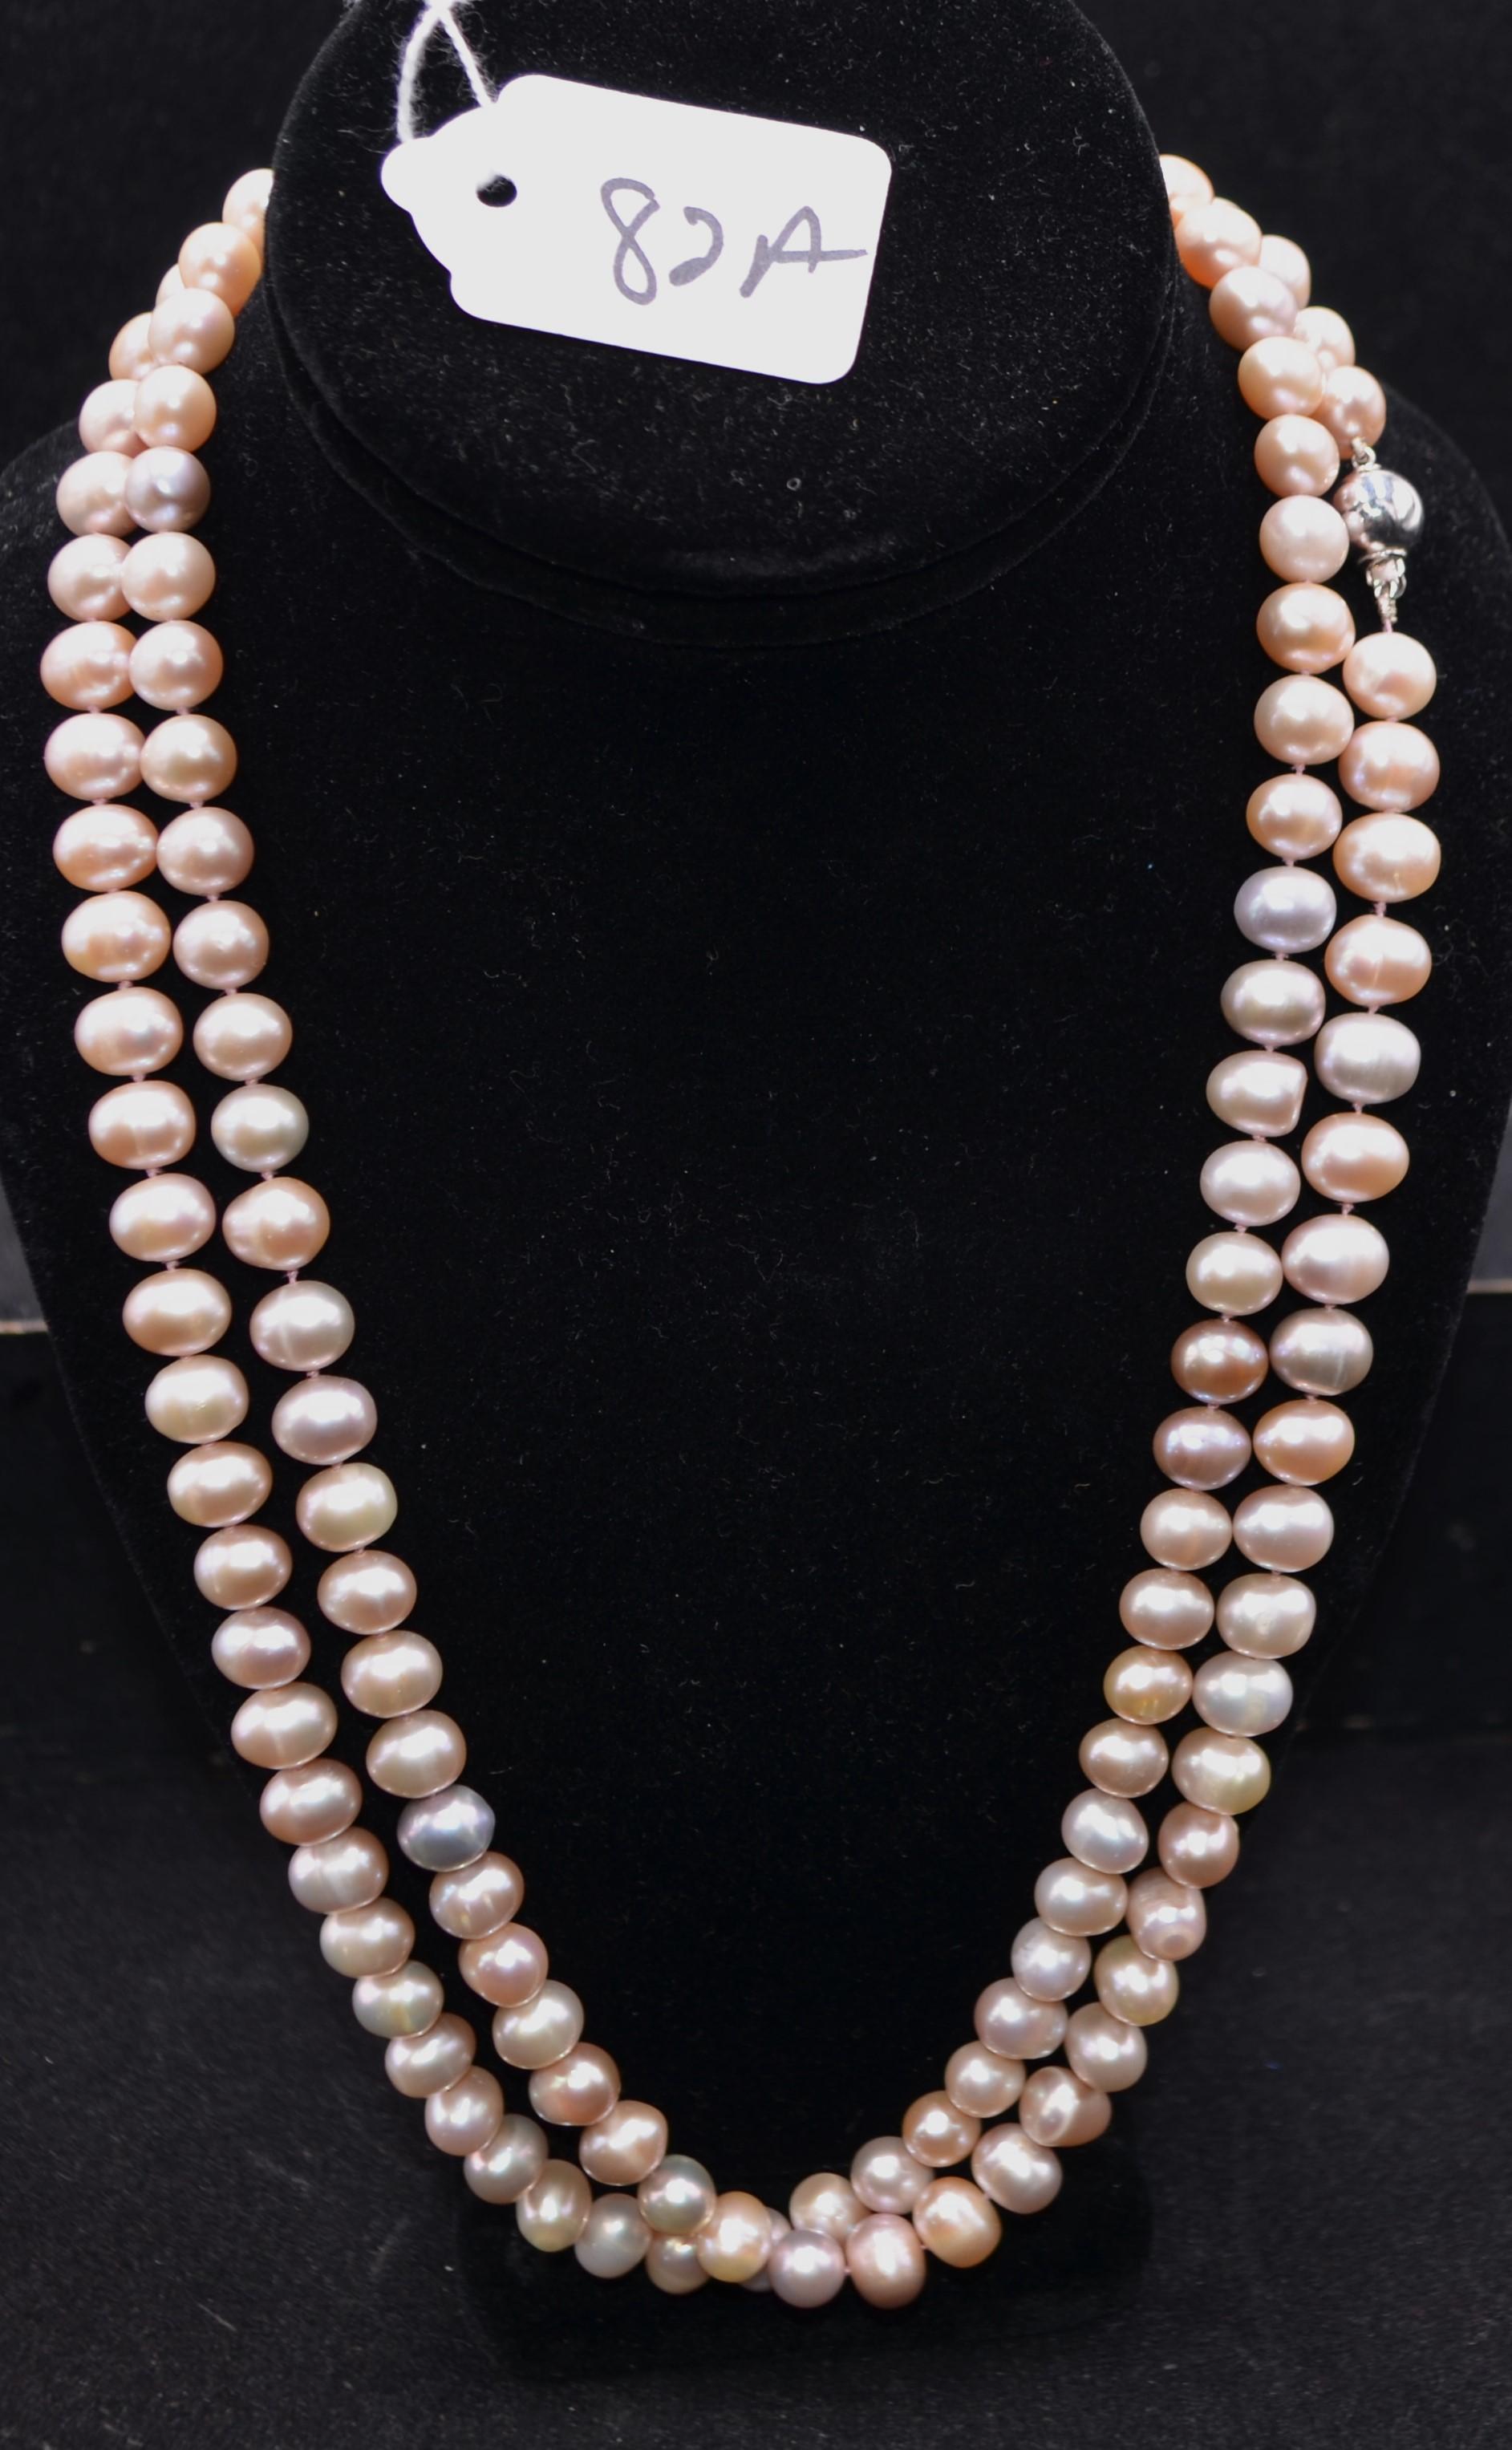 49 INCHE OF 8.0 MM STRAND OF WHITE PEARLS